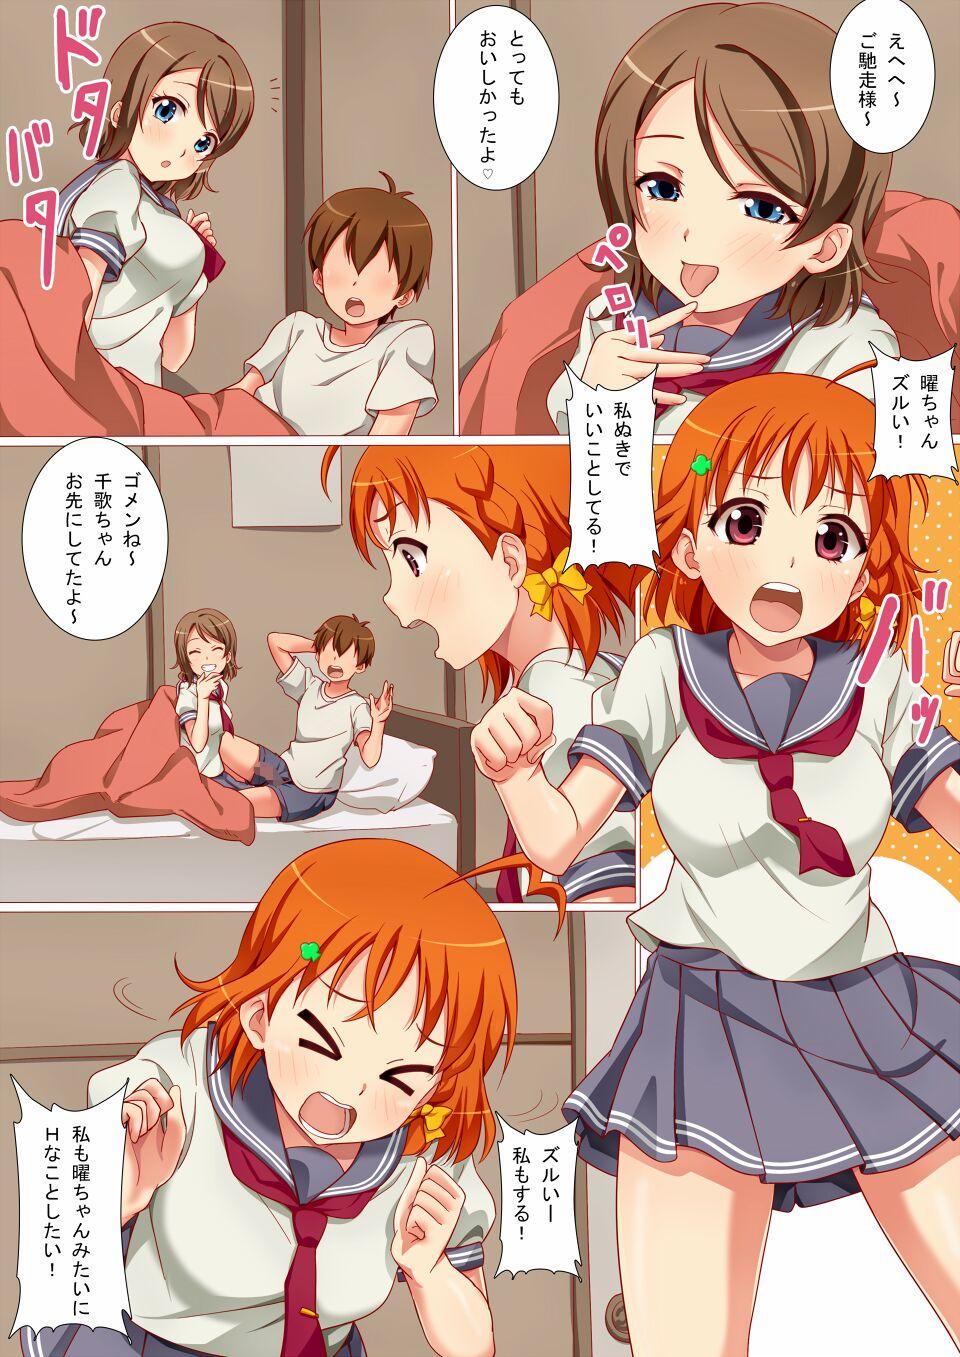 Gloryhole Morning flirting between two people - Love live sunshine Top - Page 6